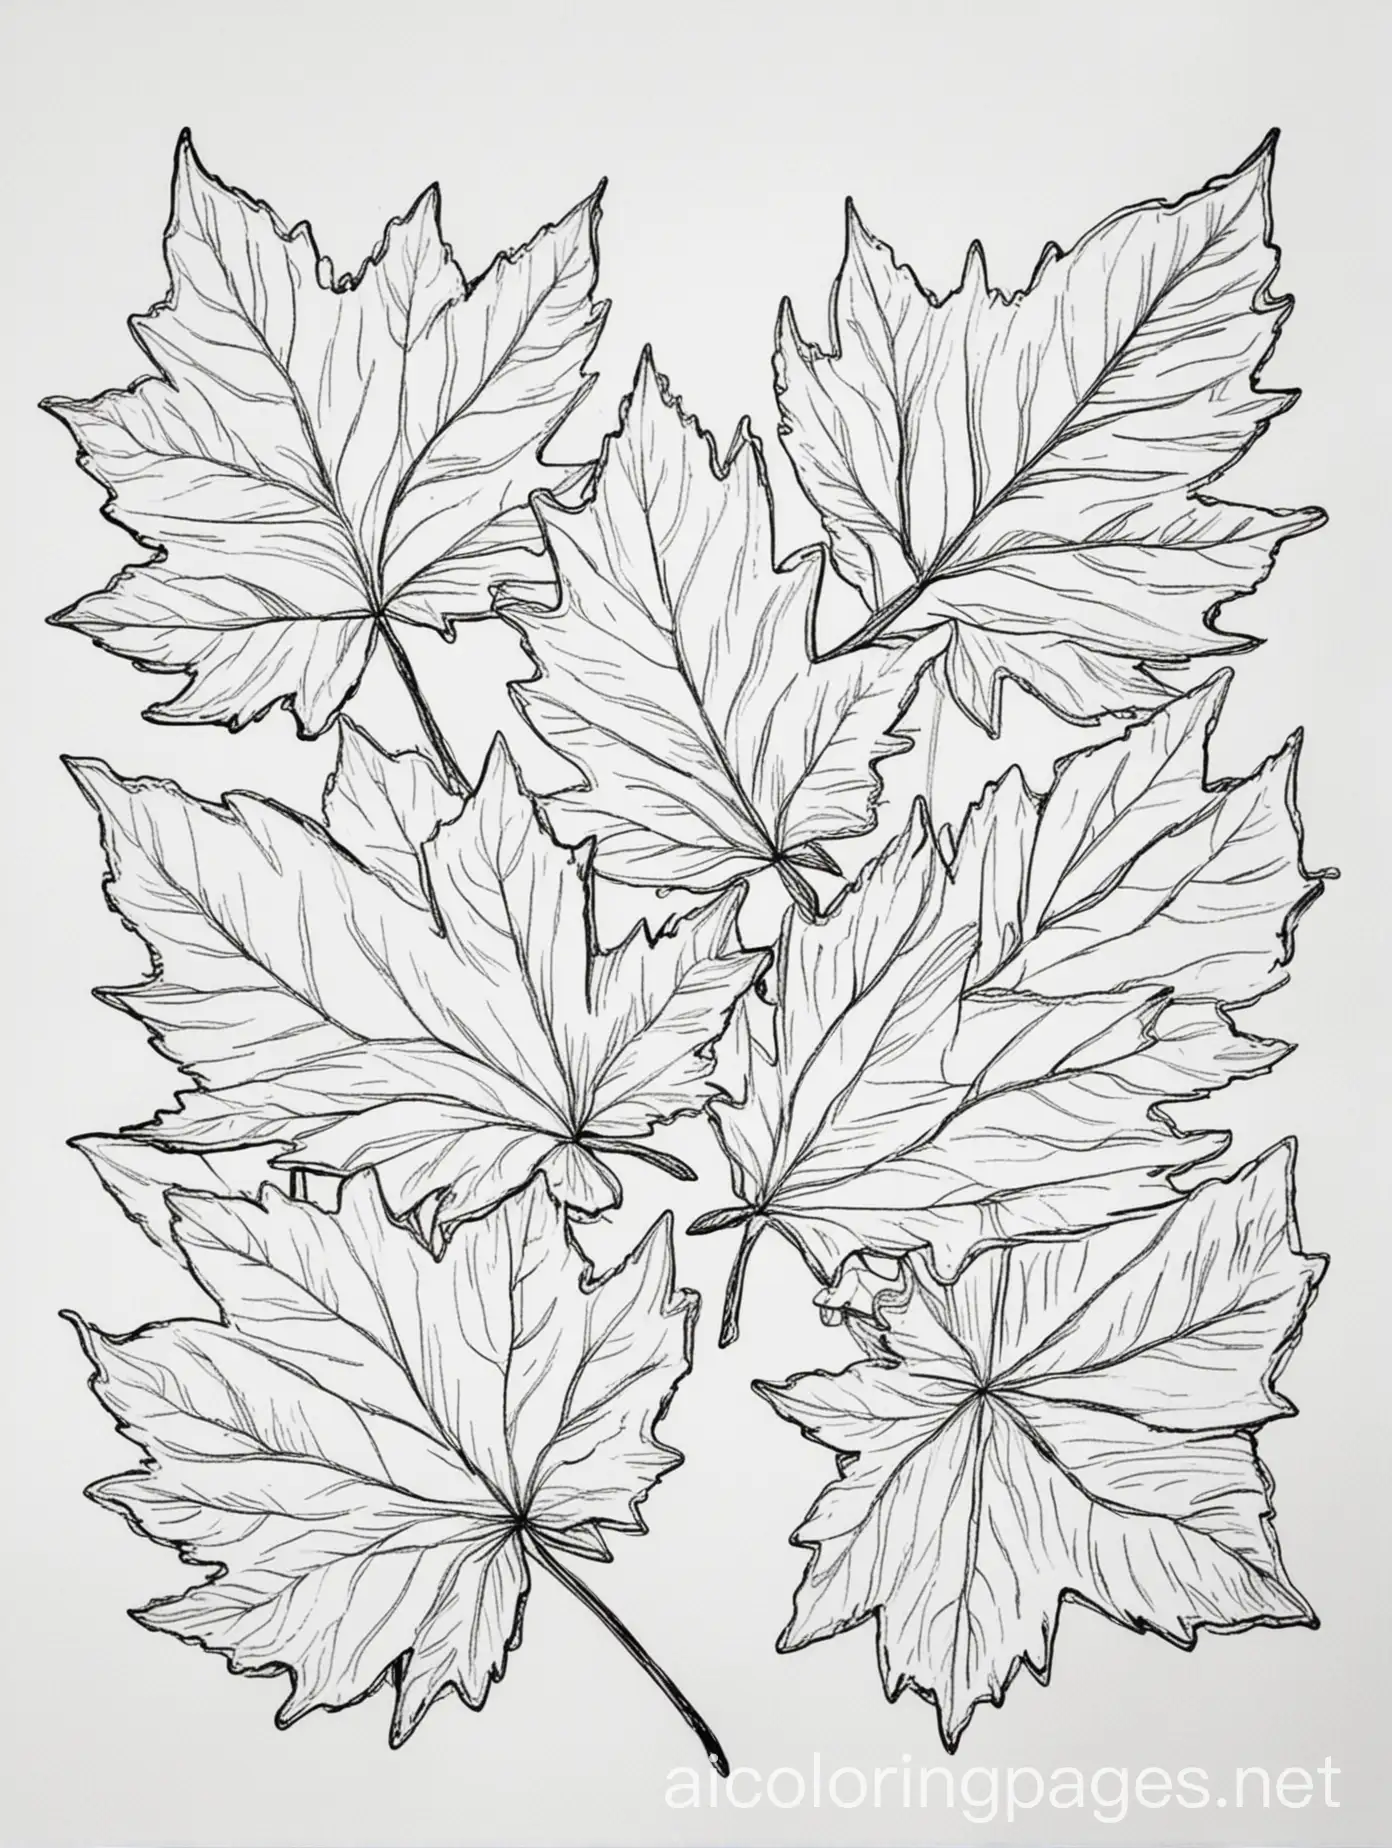 Fall Leaves, Coloring Page, black and white, line art, white background, Simplicity, Ample White Space. The background of the coloring page is plain white to make it easy for young children to color within the lines. The outlines of all the subjects are easy to distinguish, making it simple for kids to color without too much difficulty